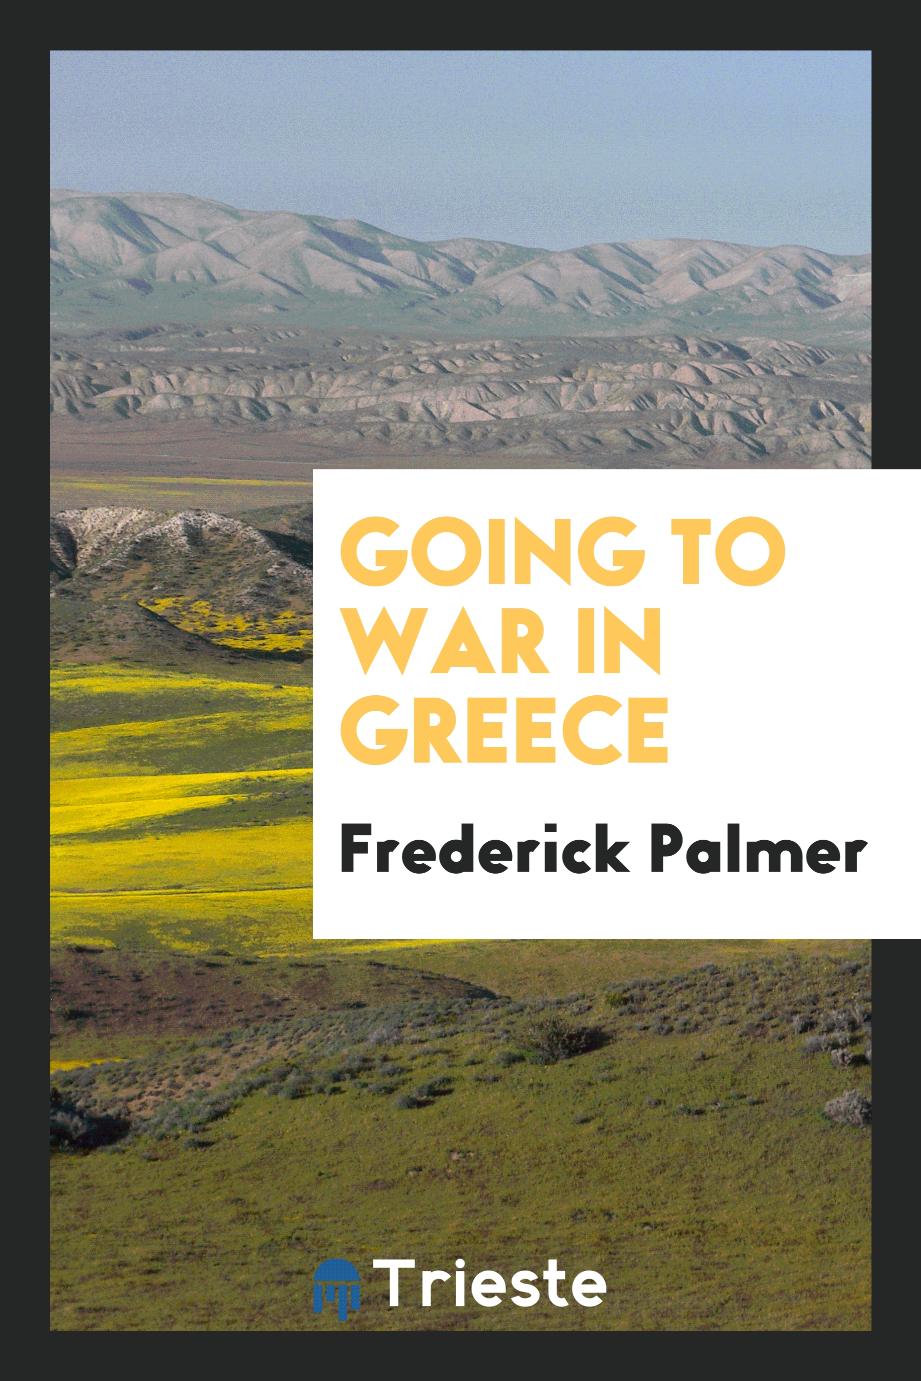 Going to war in Greece